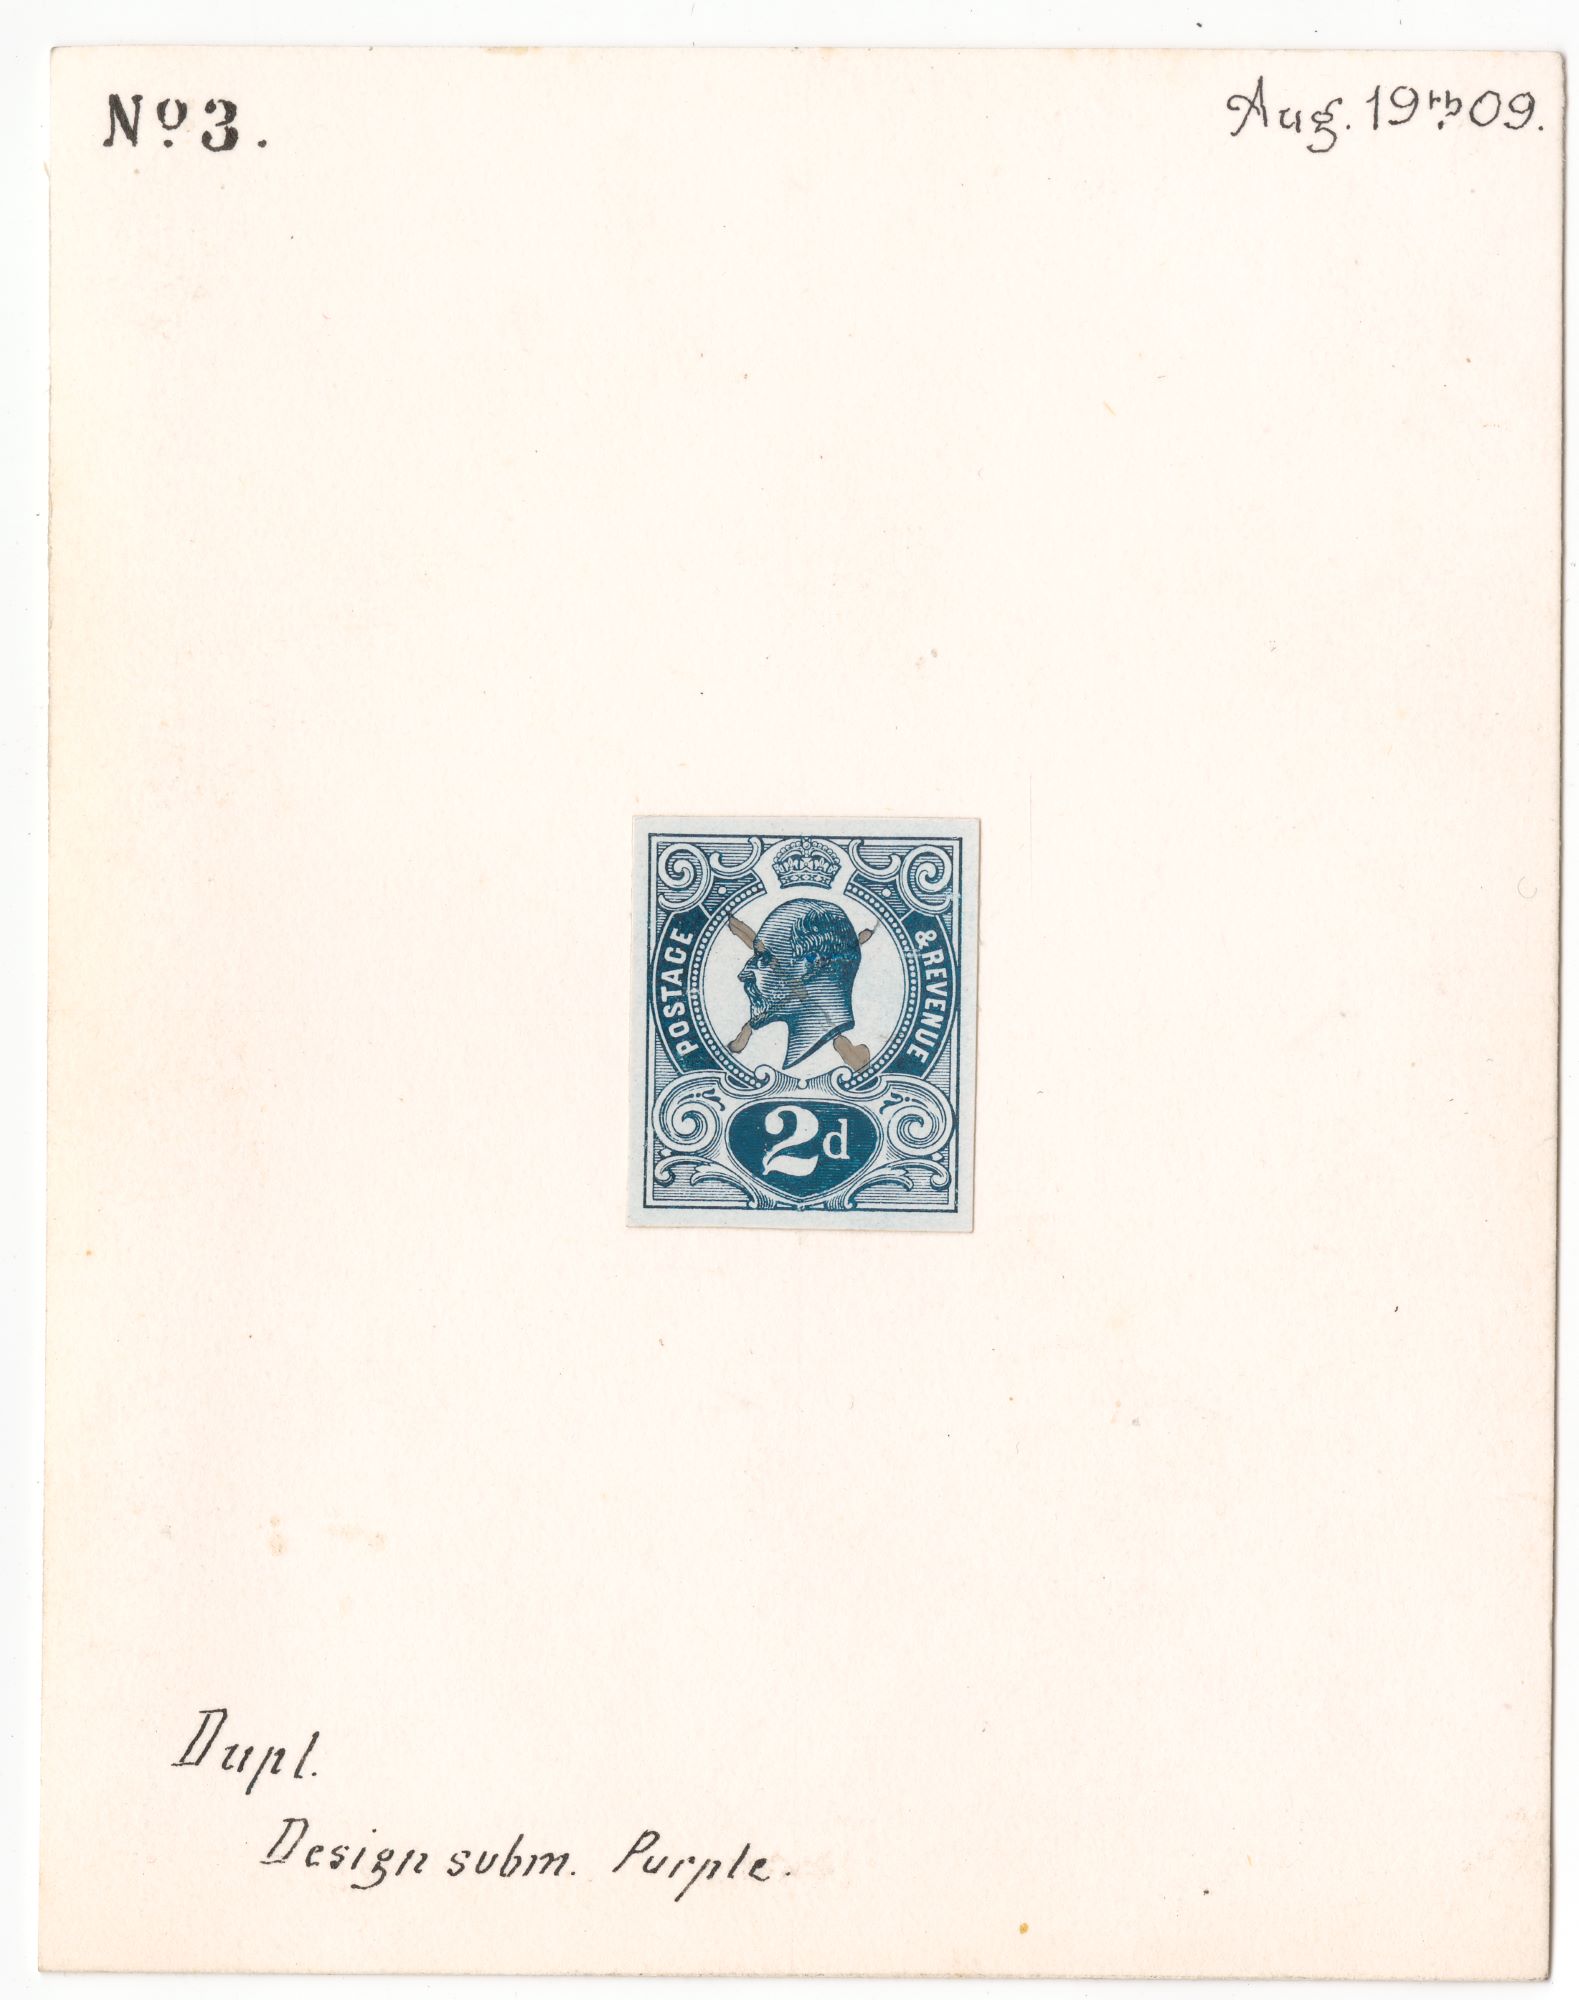 A small print of a blue stamp in the centre of a large sheet of paper. The letters '2d' are at the bottom of the stamp, just below a portrait of a king.